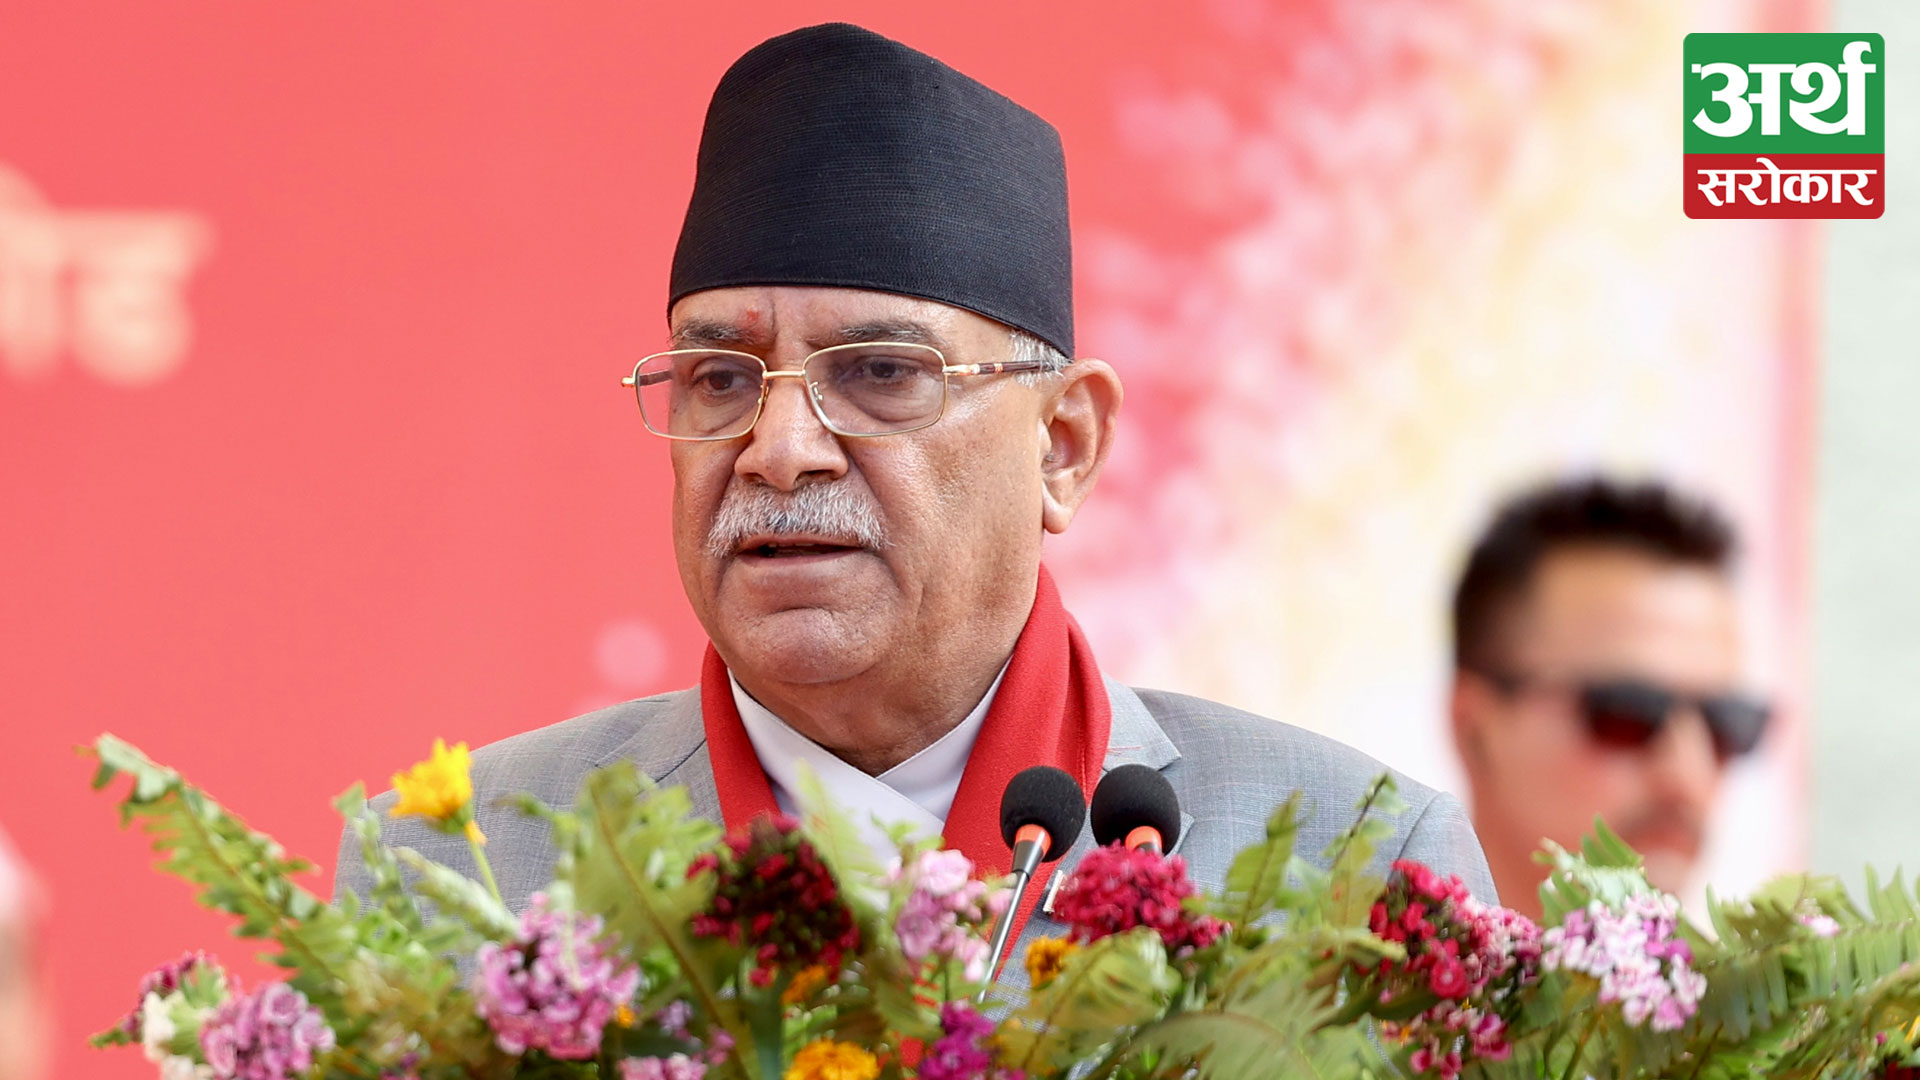 Upcoming budget is to be introduced in a new manner: PM Dahal